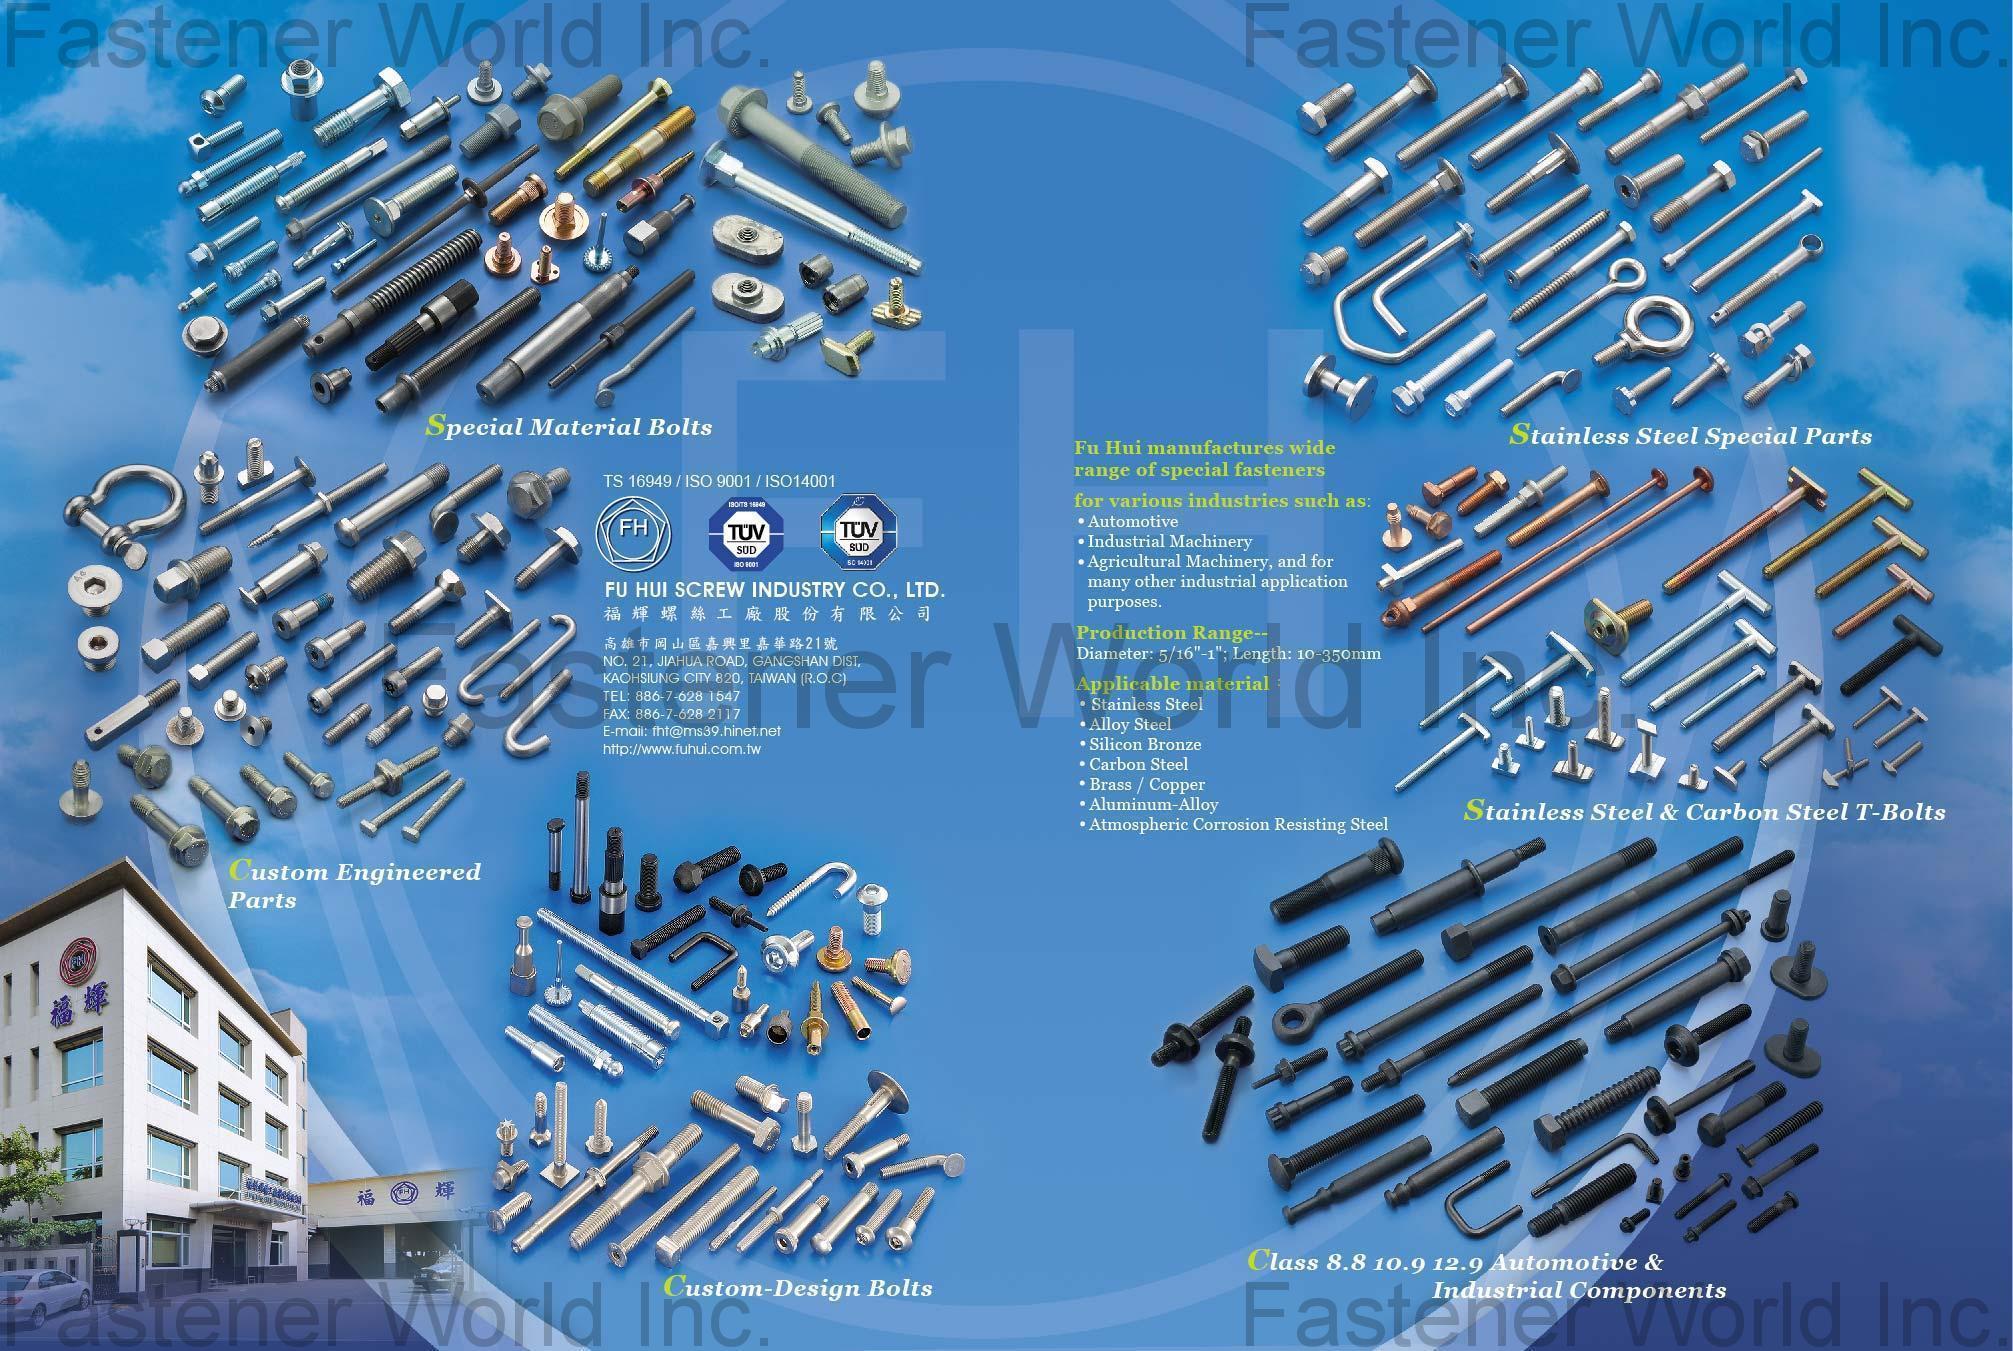 FU HUI SCREW INDUSTRY CO., LTD. (FUKUNG  HARDWARE  CO.  LTD.) , Special Material Bolts, Custom Engineered Parts, Custom-Design Bolts, Stainless Steel Special Parts, Stainless Steel & Carbon Steel T-Bolts, Class 8.8 10.9 12.9 Automotive & Industrial Components , Automotive Parts